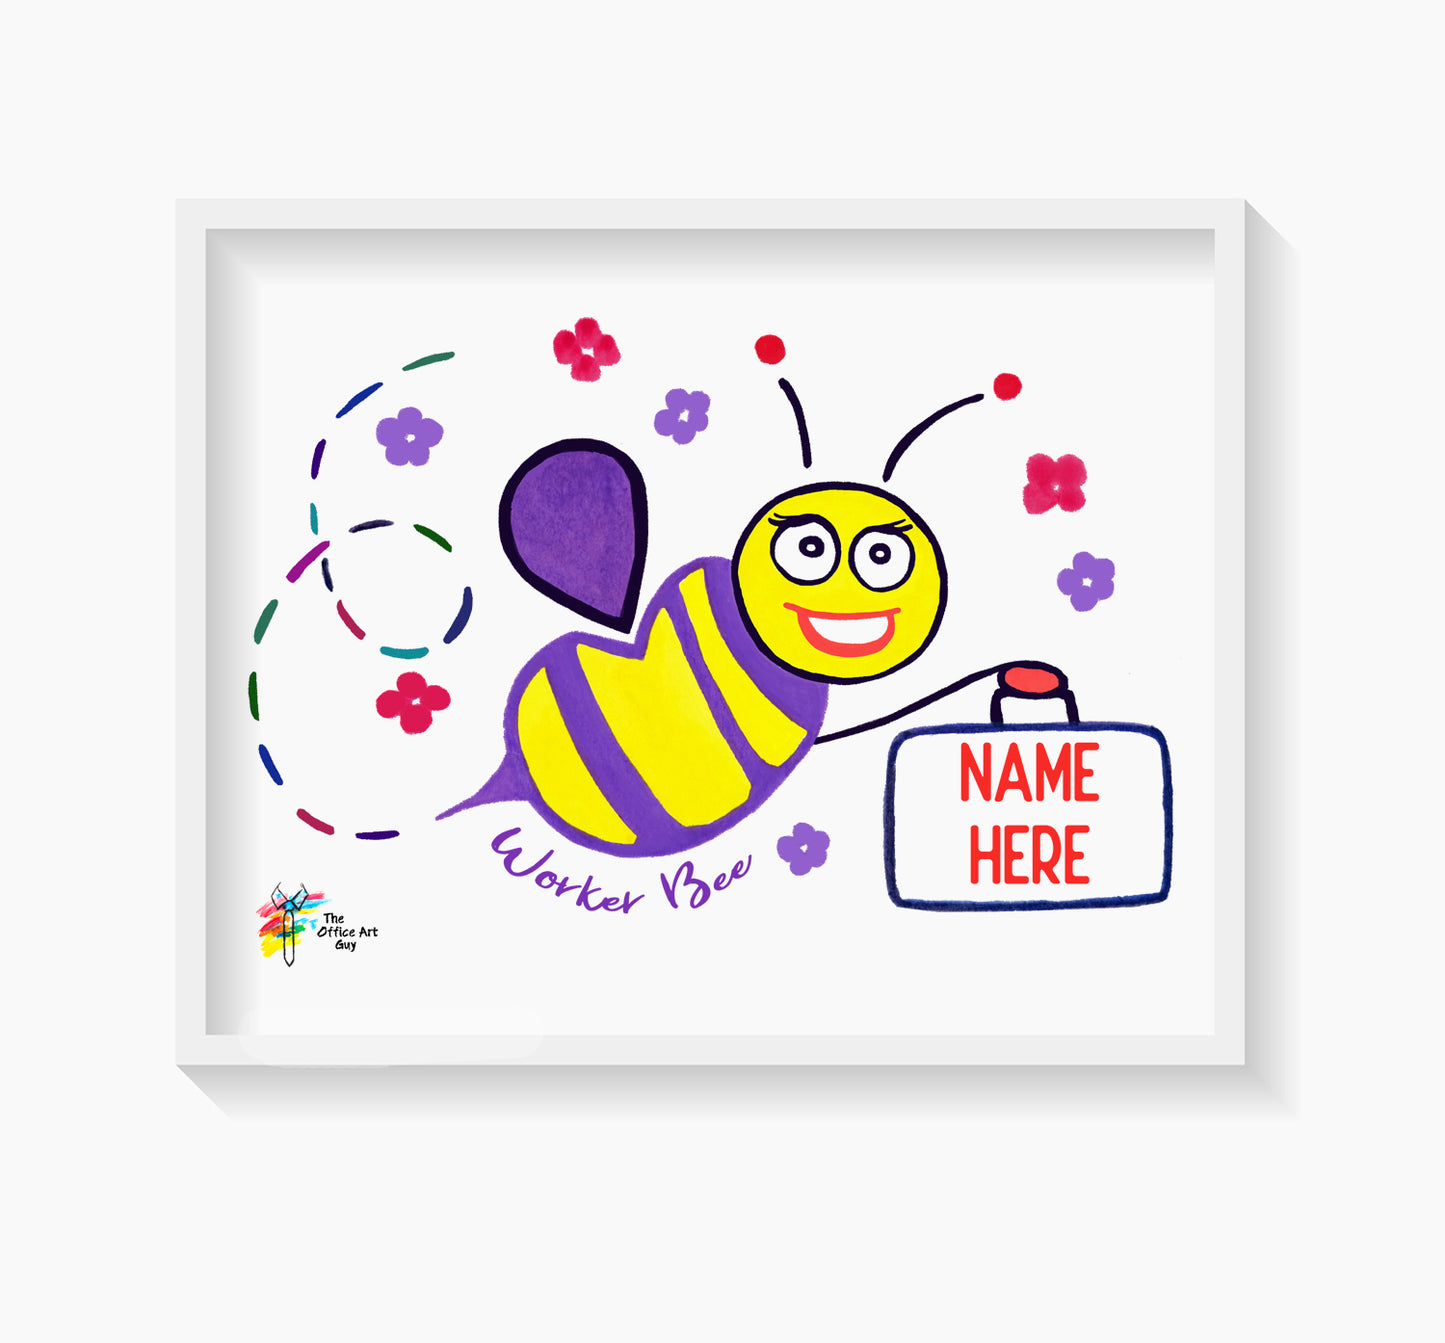 Worker Bee Funny Office Art Print Personalized Coworker Gift by The Office Art Guy